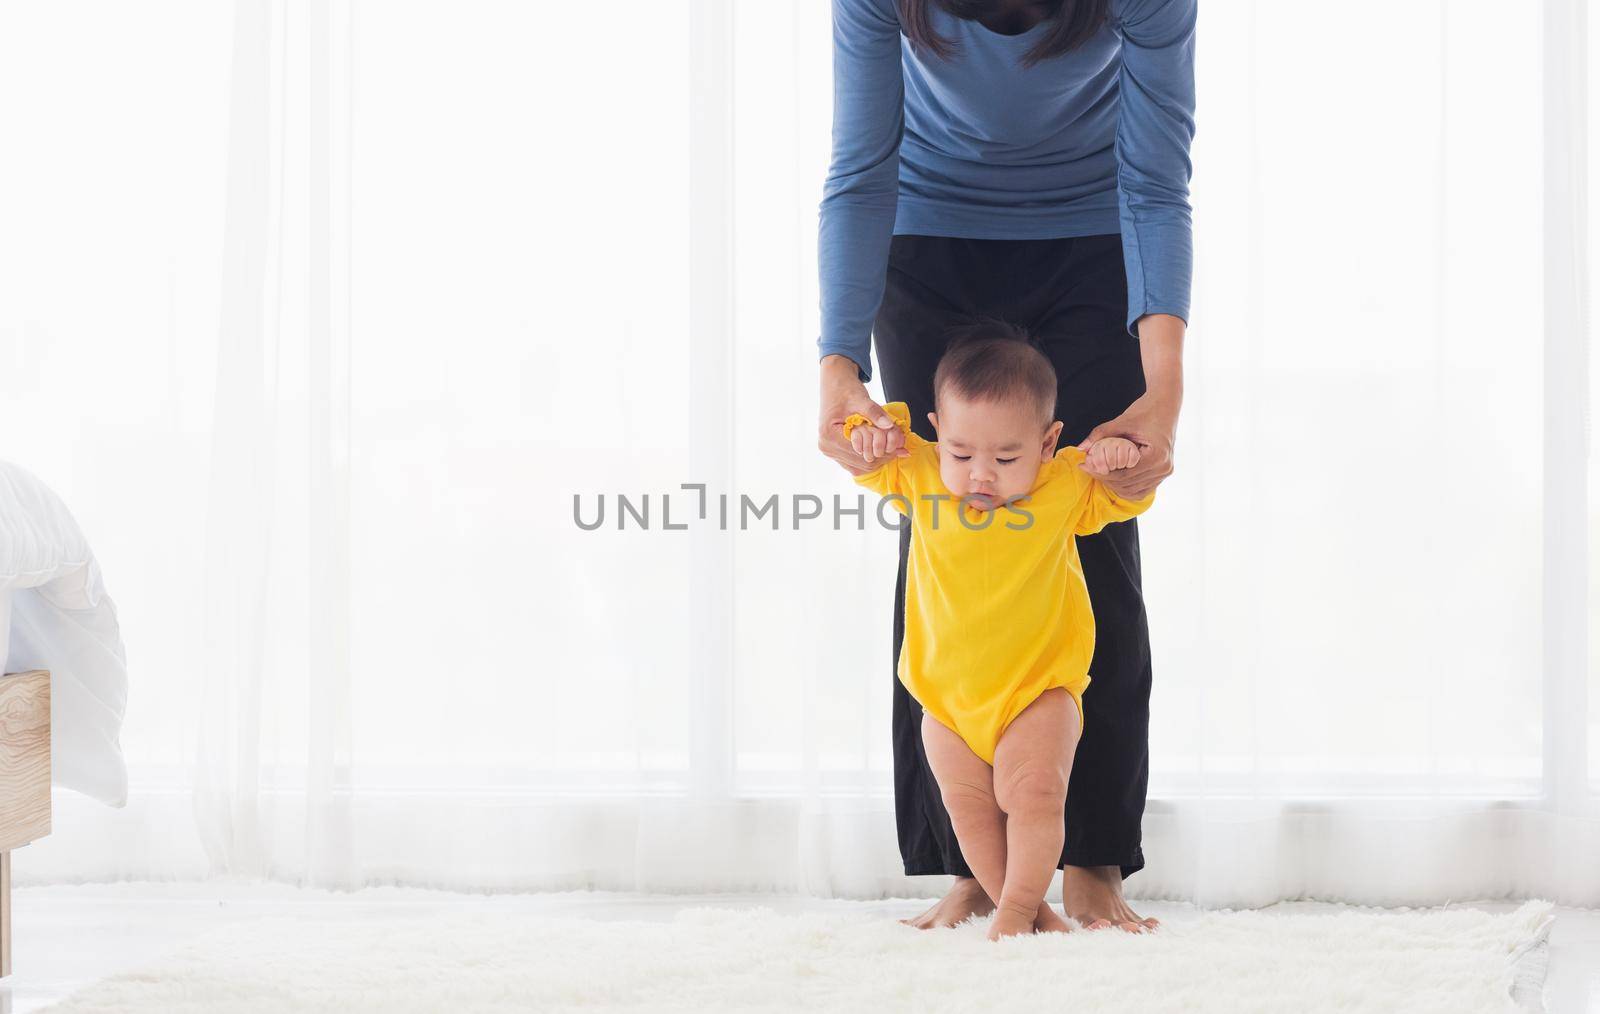 Asian little baby girl taking first steps learning to walk with mom help support the cute unstable walking toddler at home in bedroom. Happy family first steps parenthood concept